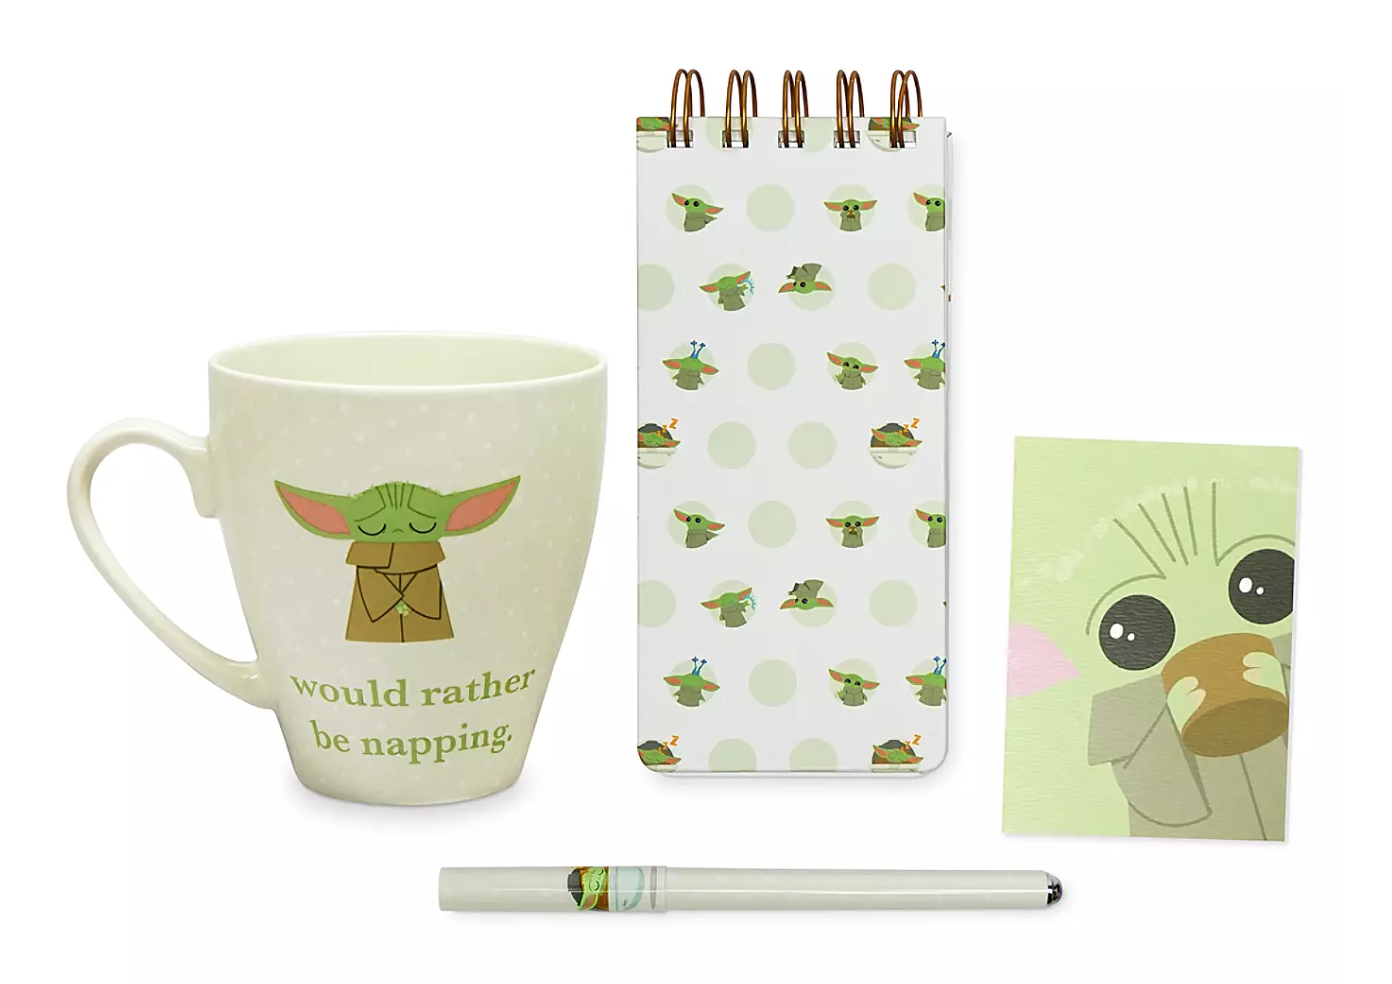 https://allears.net/wp-content/uploads/2021/03/shopdisney-2021-march-magic-the-child-baby-yoda-grogu-the-mandalorian-mug-and-stationery-set.png